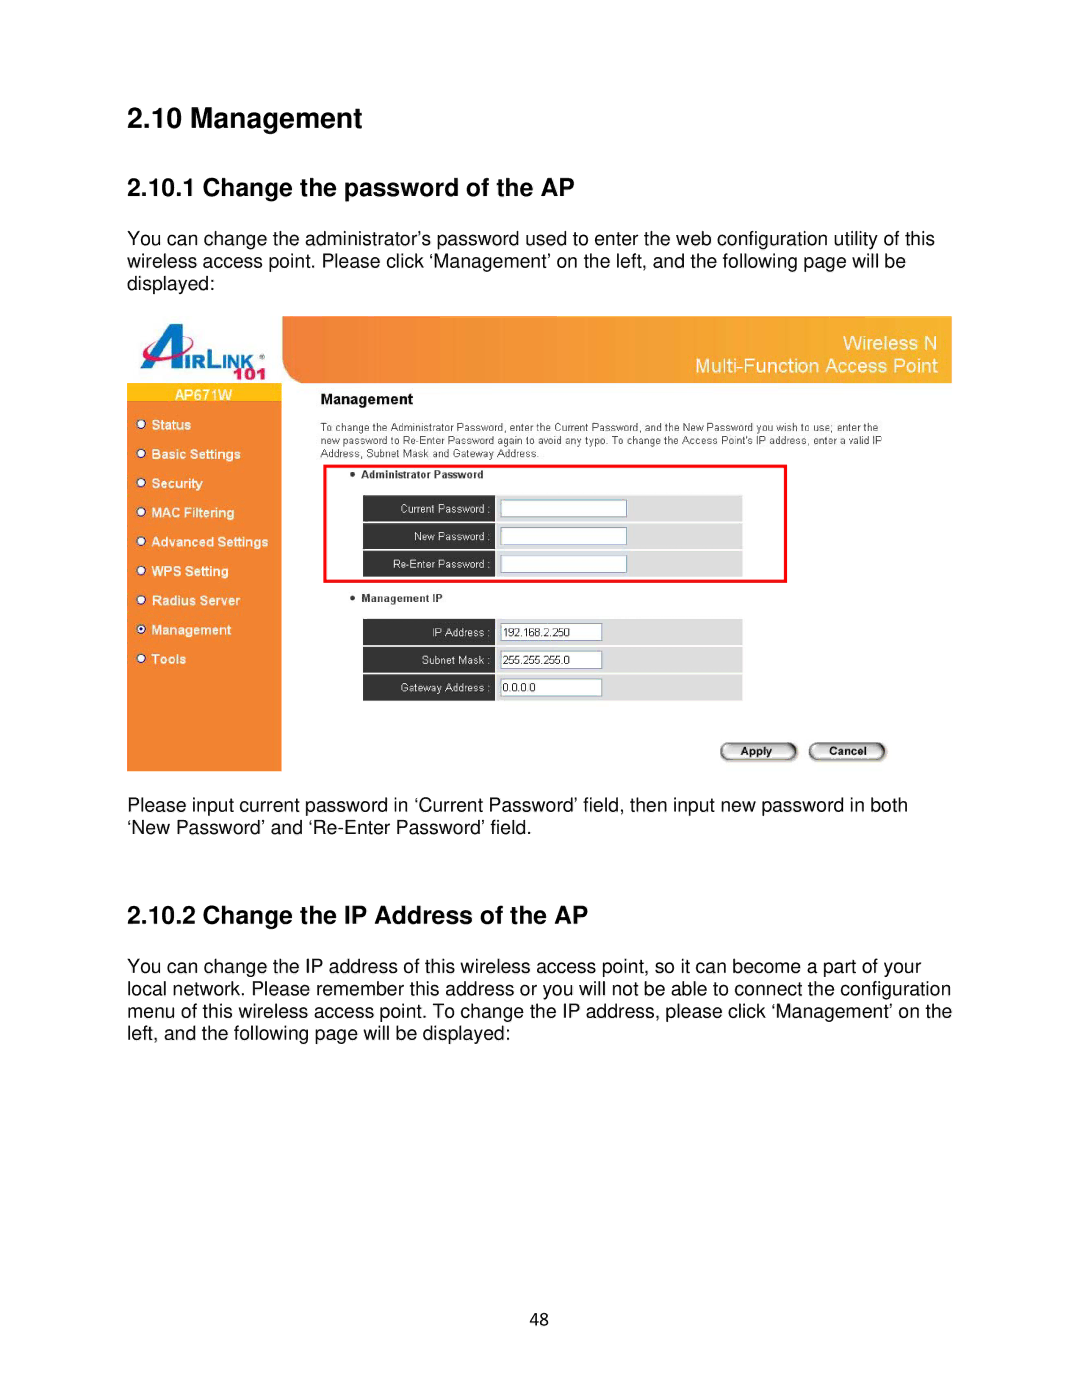 Airlink101 N300 user manual Management, Change the password of the AP, Change the IP Address of the AP 